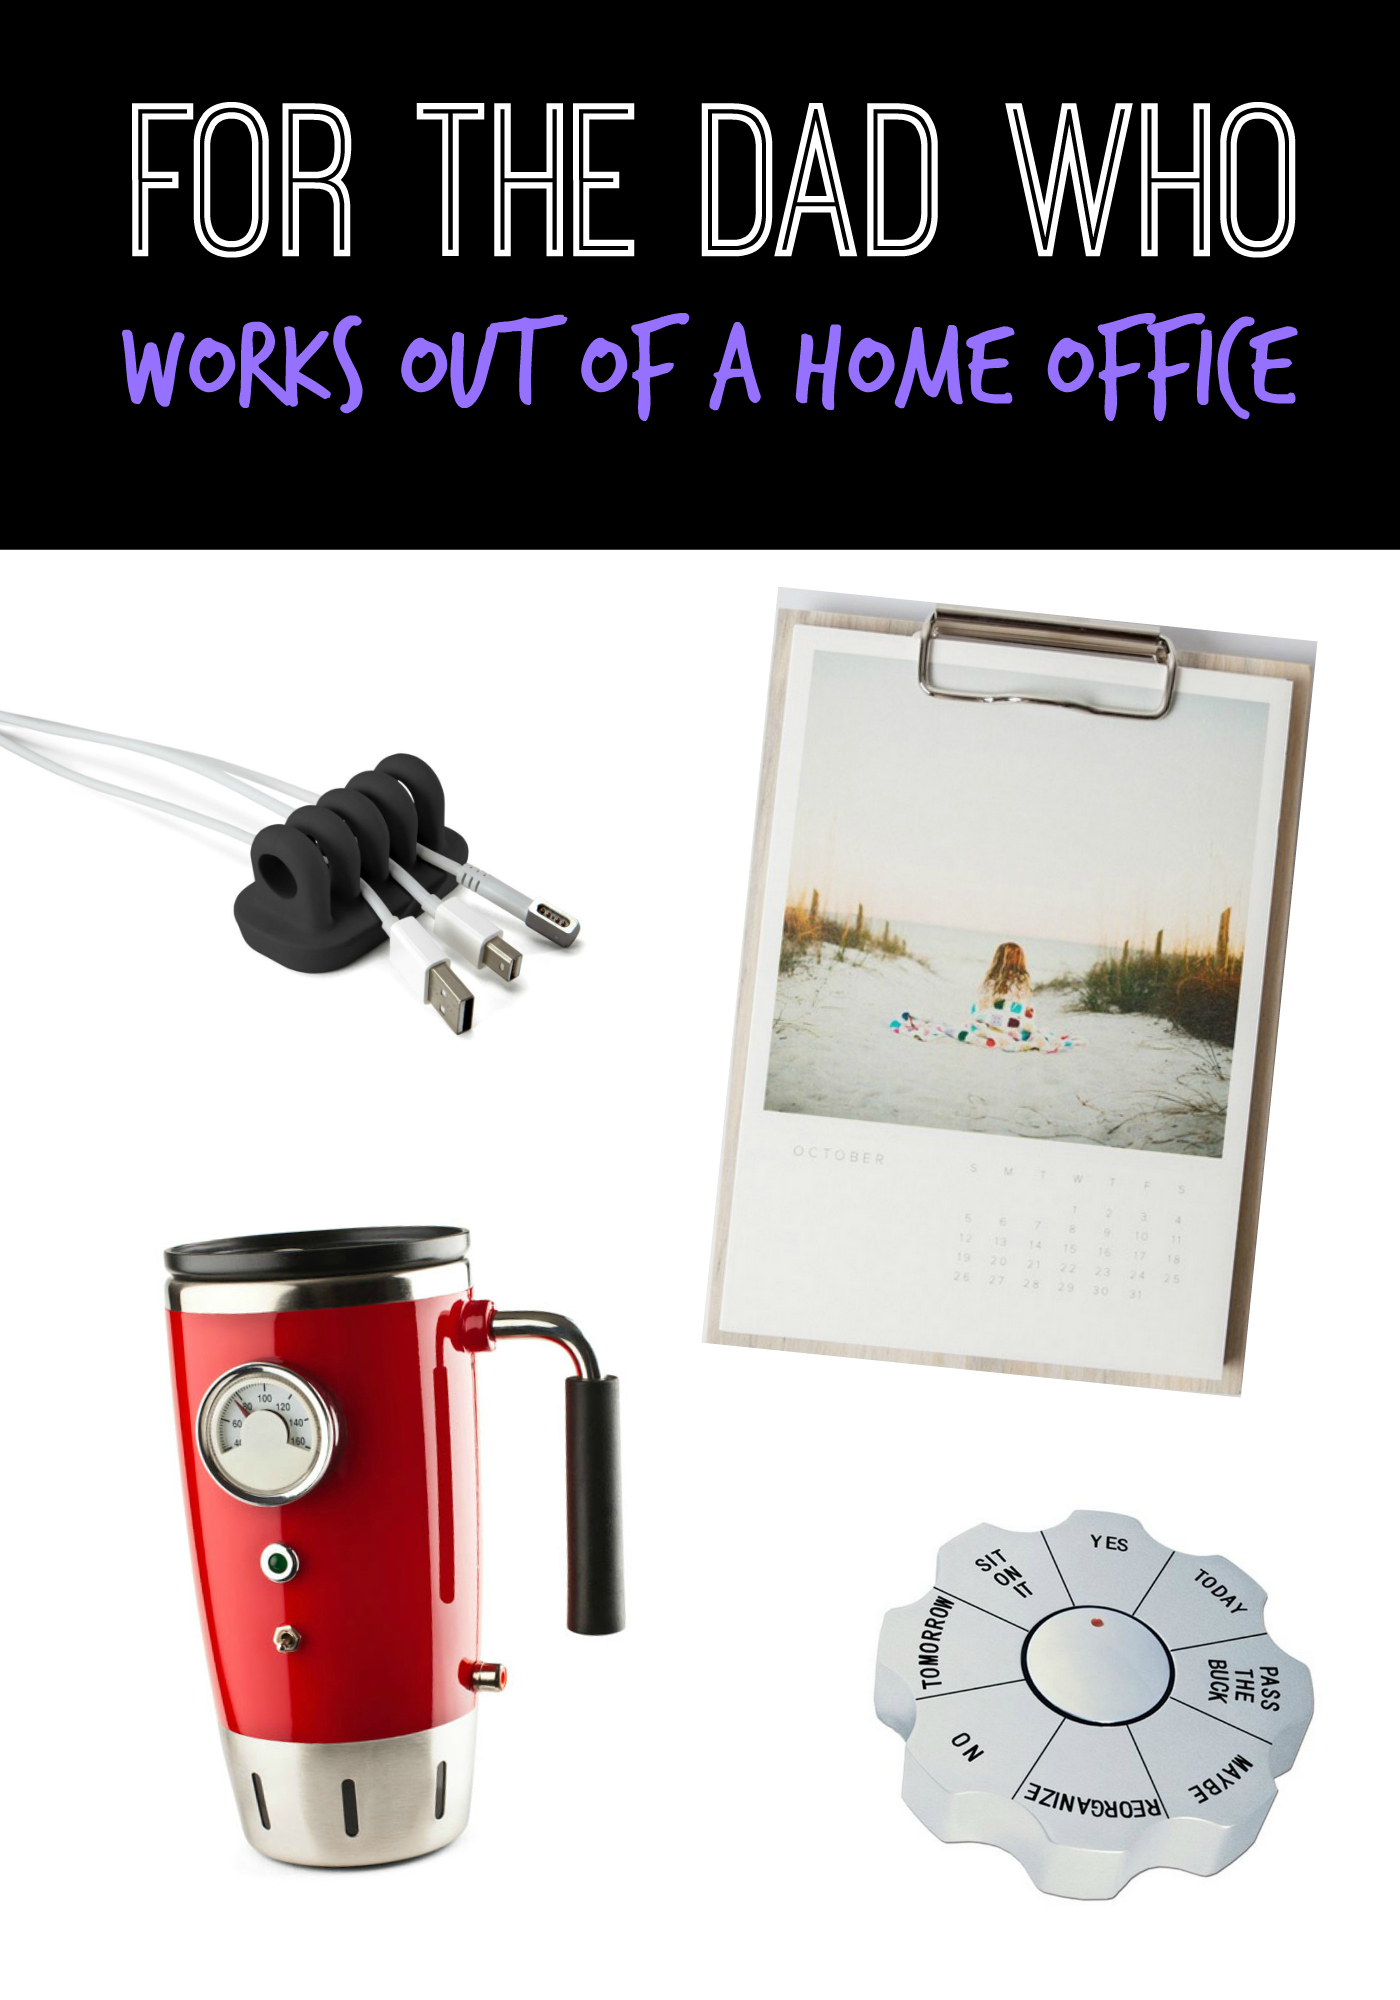 For the Dad Who Works out if a Home Office